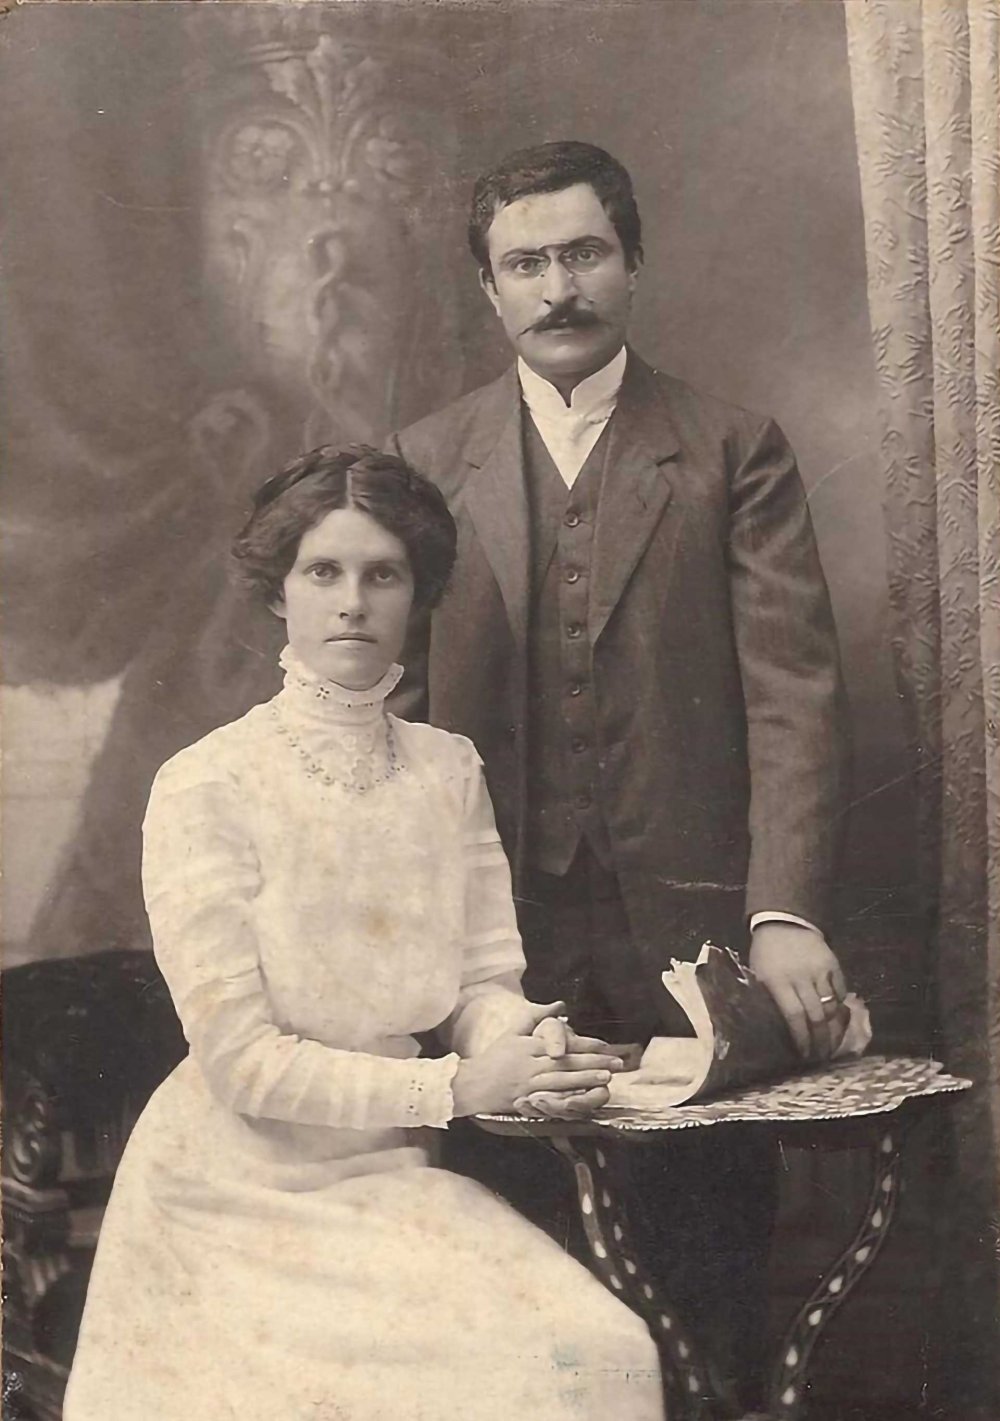 Palestinian physician Tawfiq Canaan with his wife, Margaret (Margot) Eilender, Jerusalem 1915